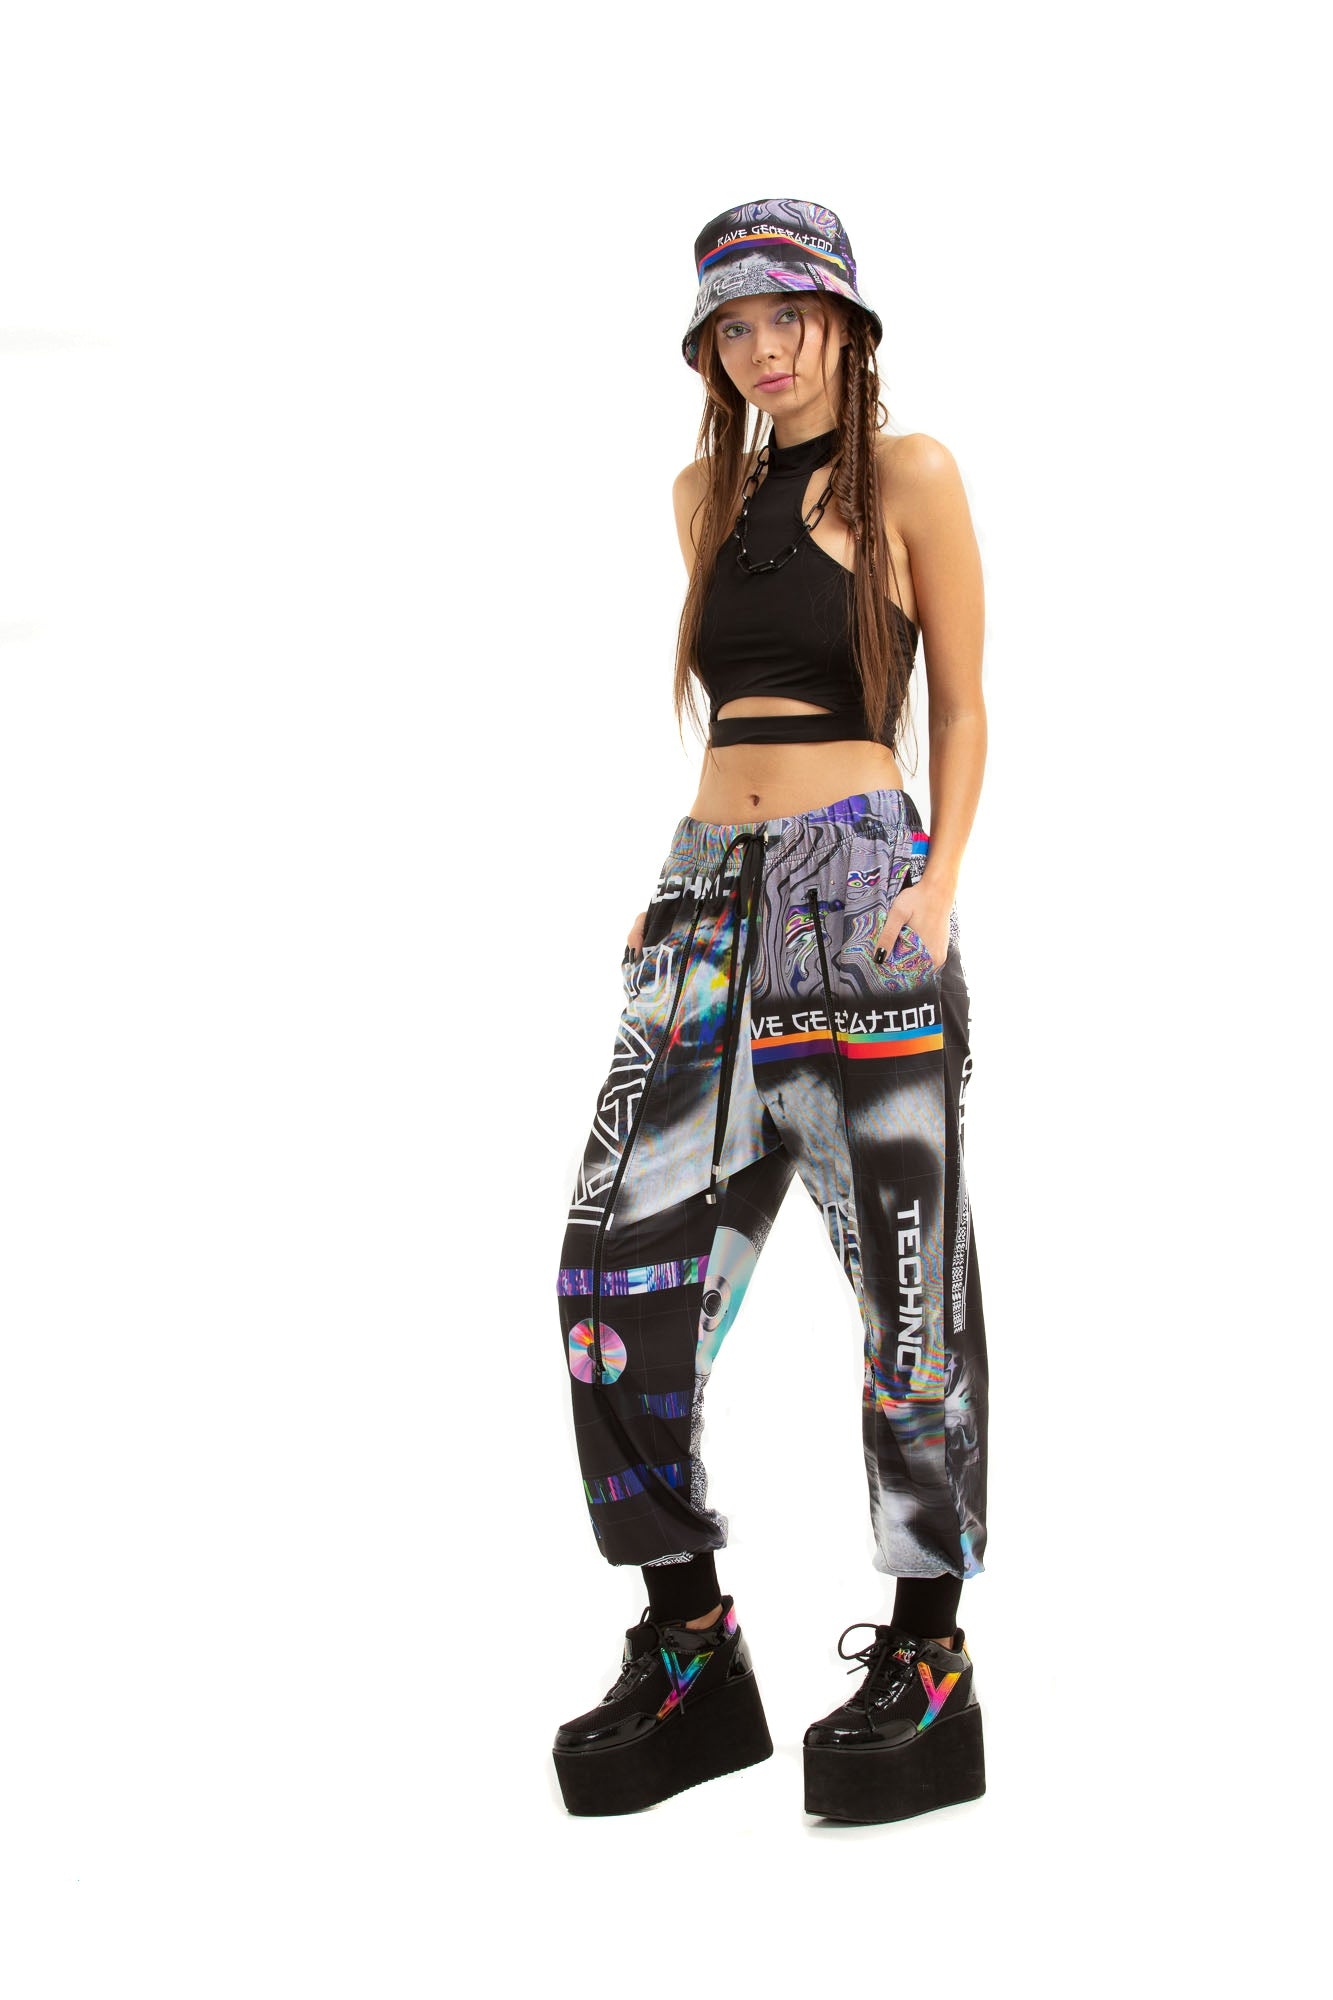 RAVE TV ZIP - up trousers